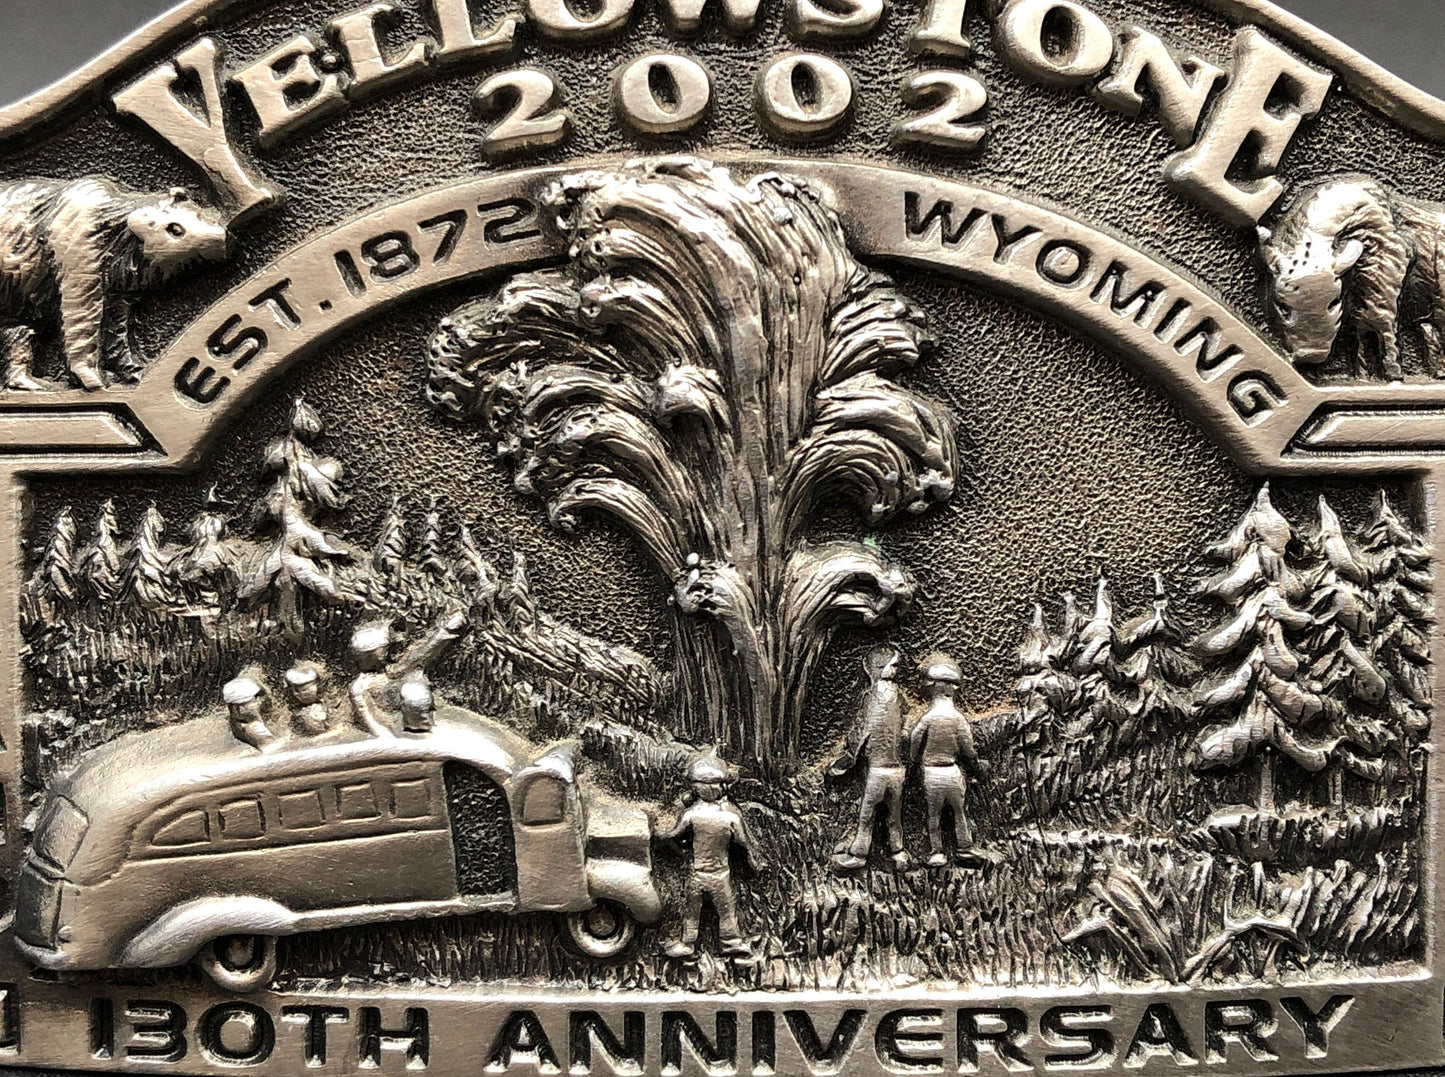 Yellowstone 2002 - 130th Anniversary Limited Edition Belt Buckle - #125/1000